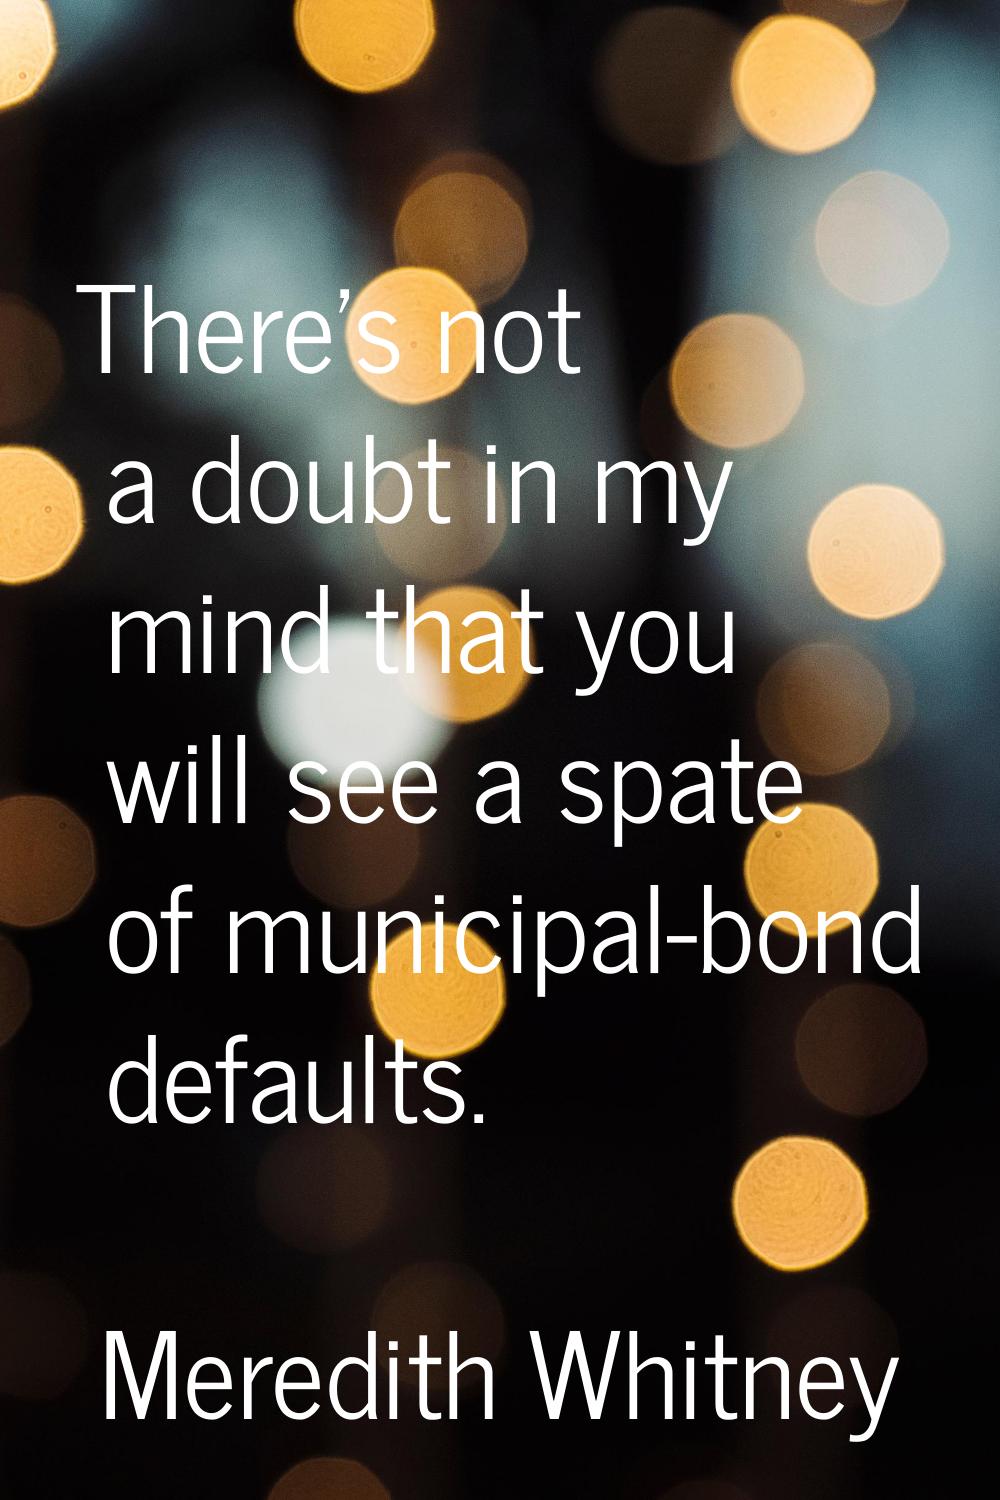 There's not a doubt in my mind that you will see a spate of municipal-bond defaults.